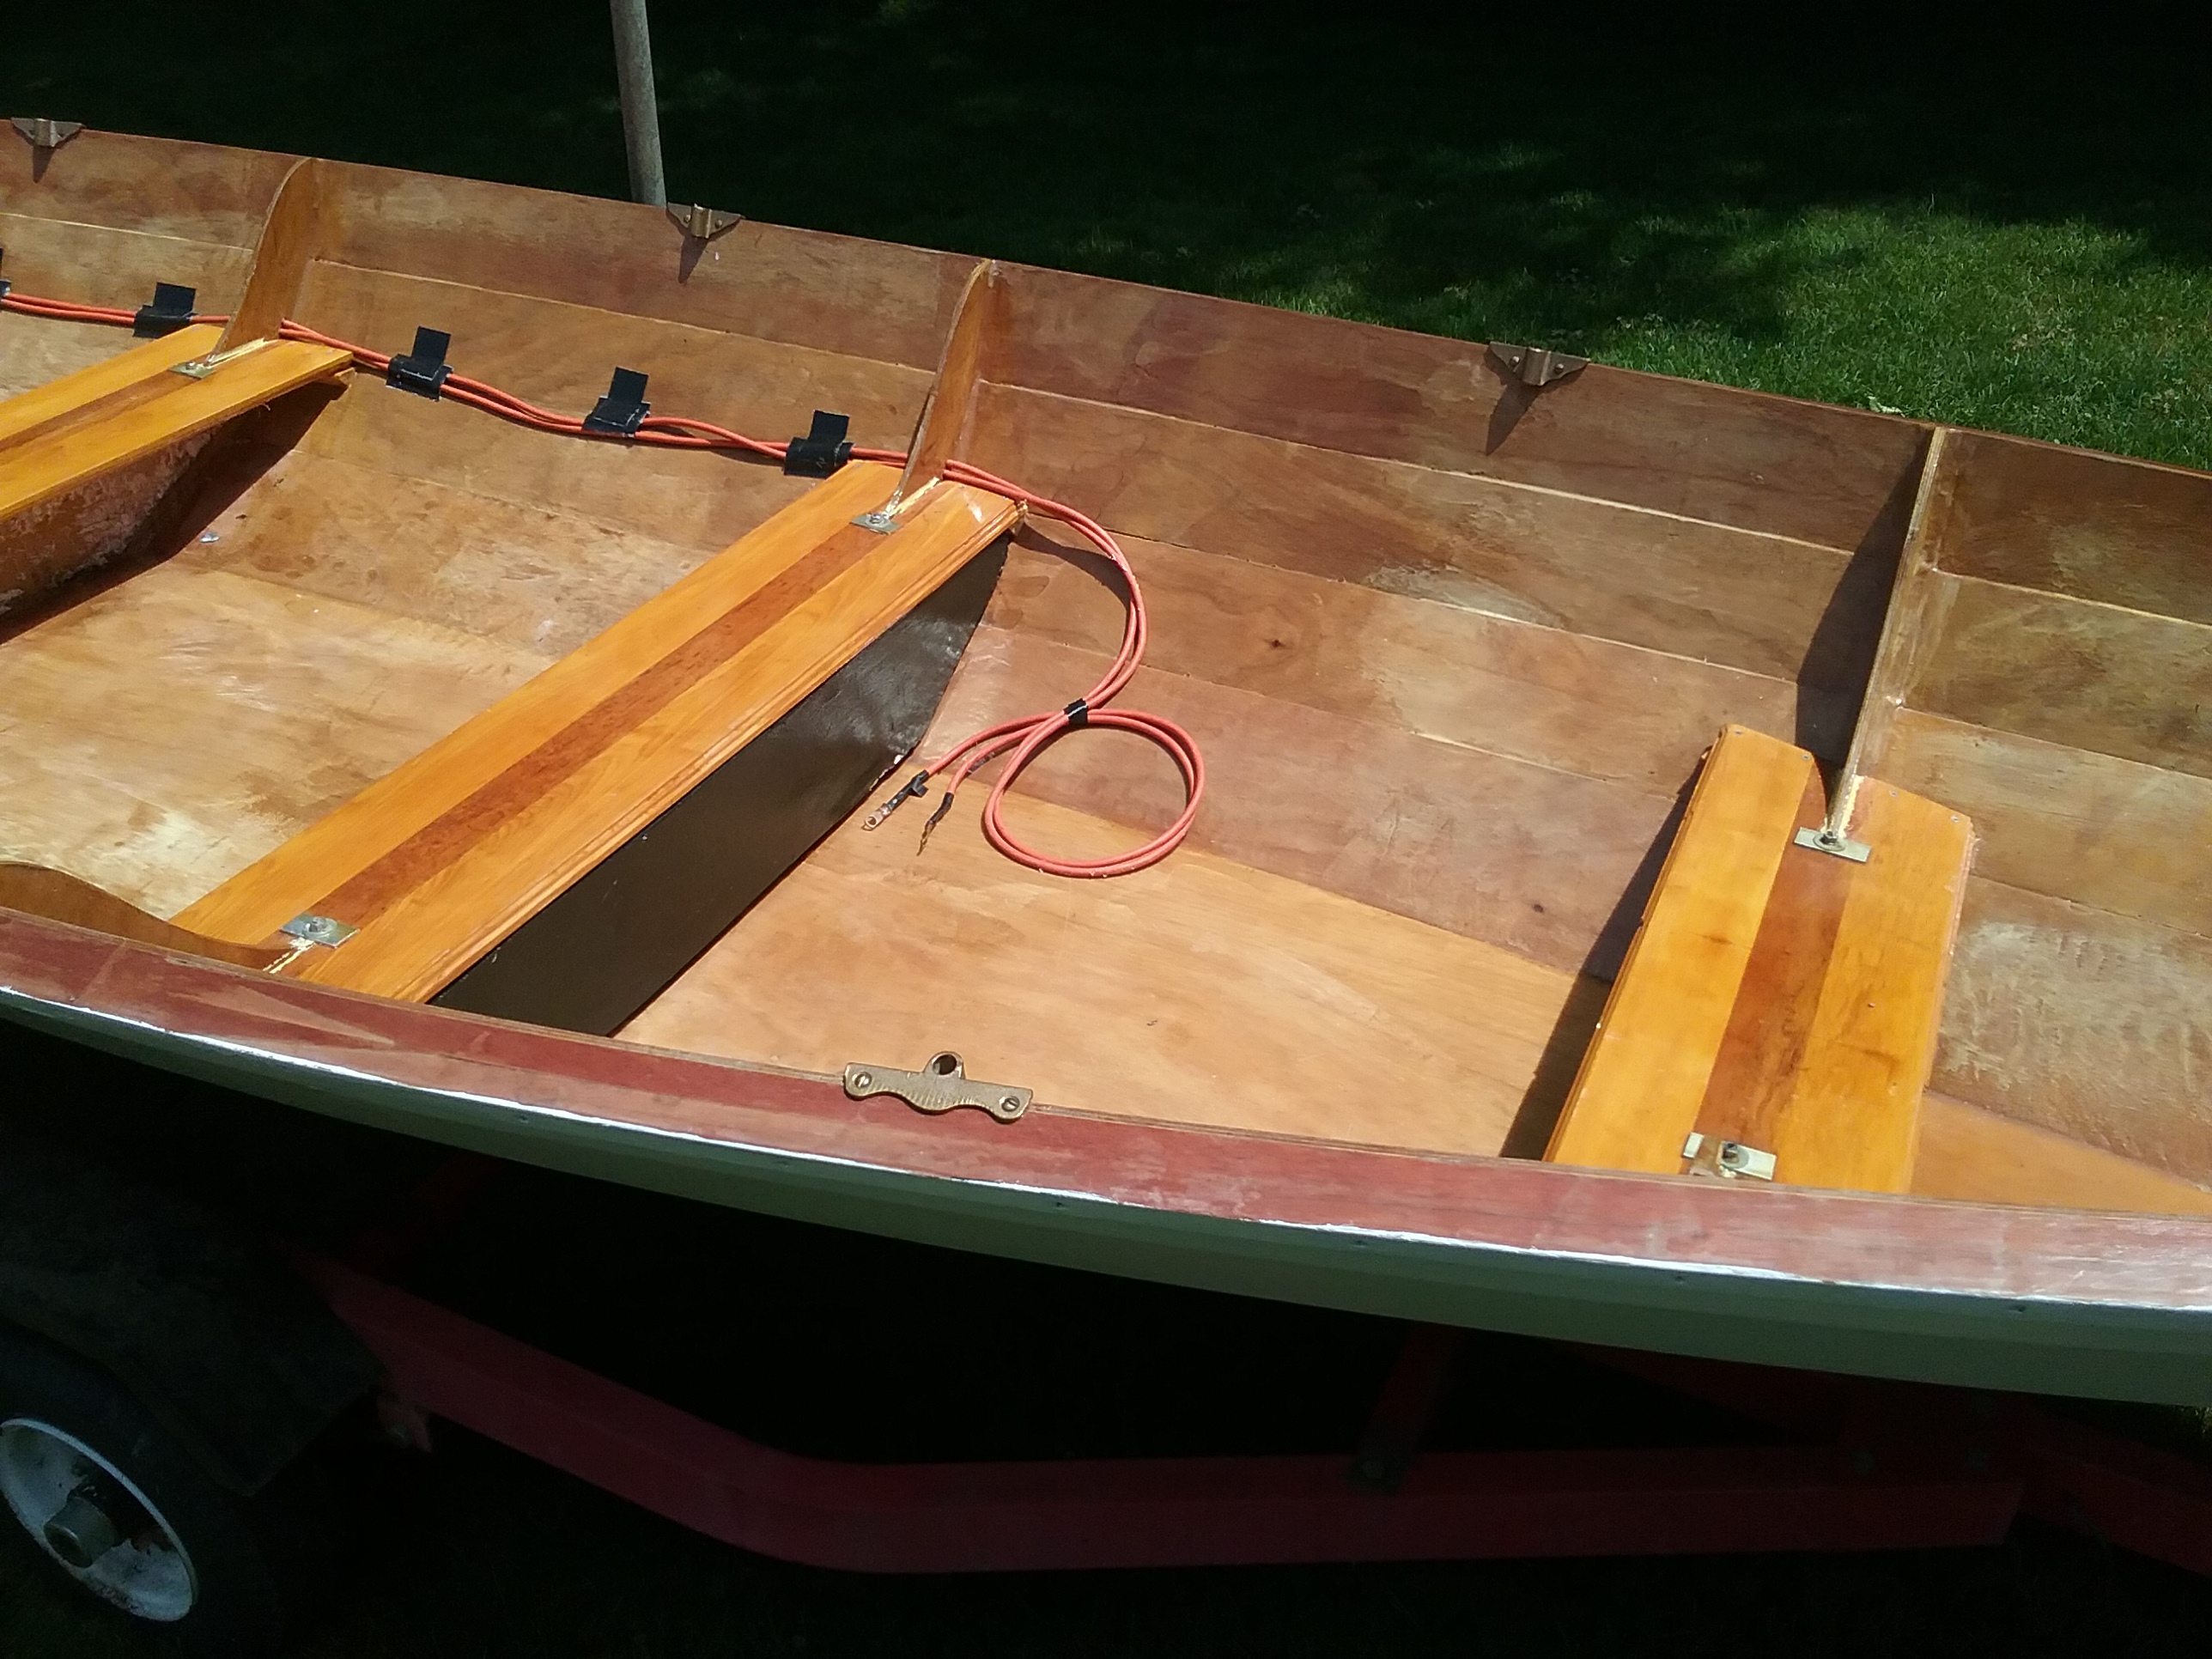 2009 17 foot Chesapeake northeaster dory Rowboat for sale in Grand Haven, MI - image 3 